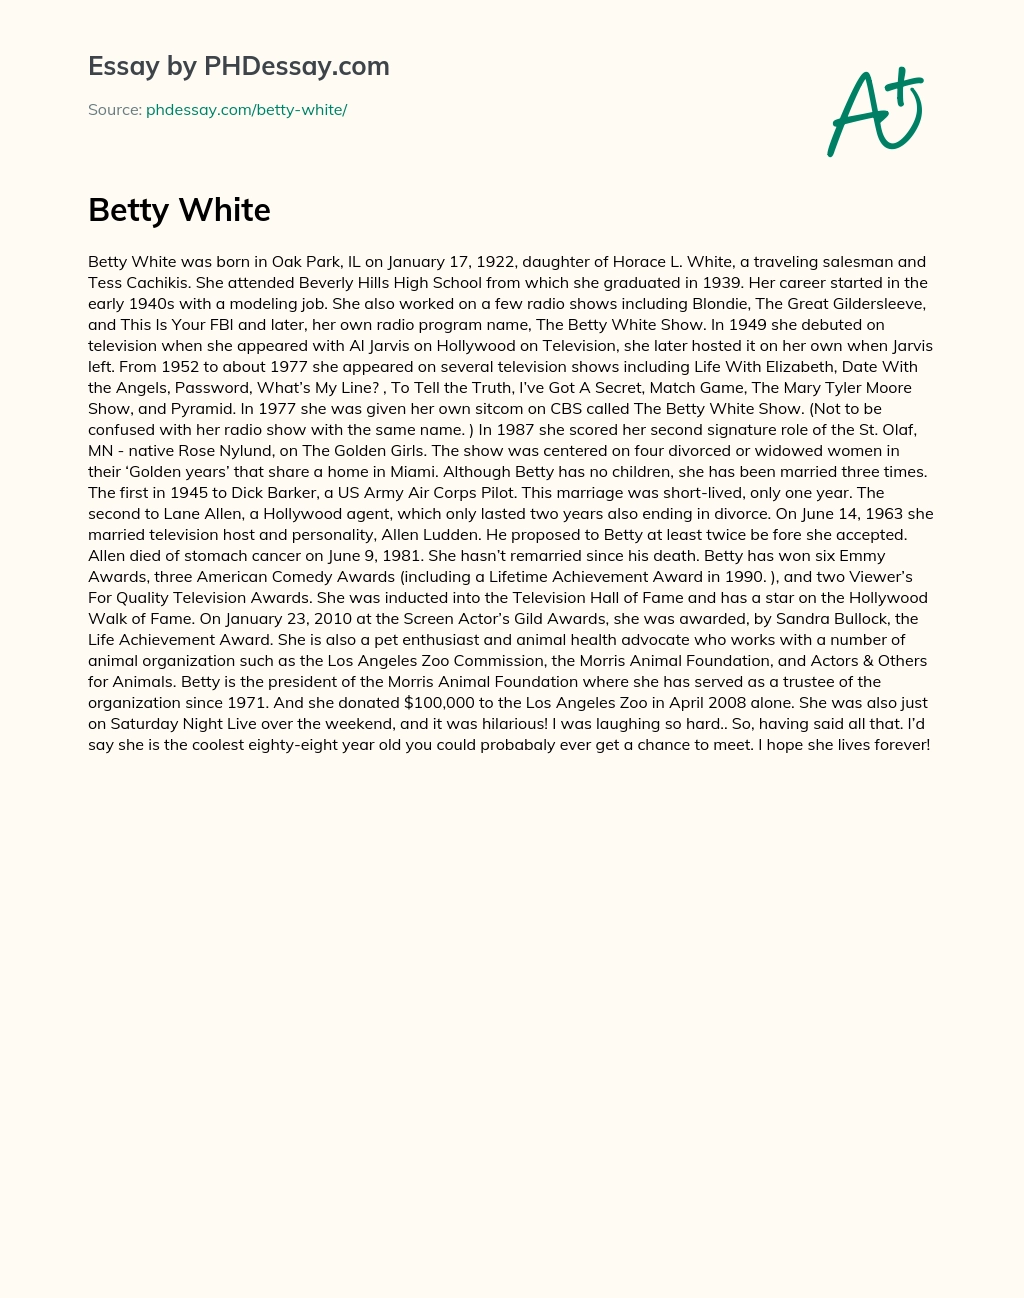 Betty White’s Career in Television and Radio essay